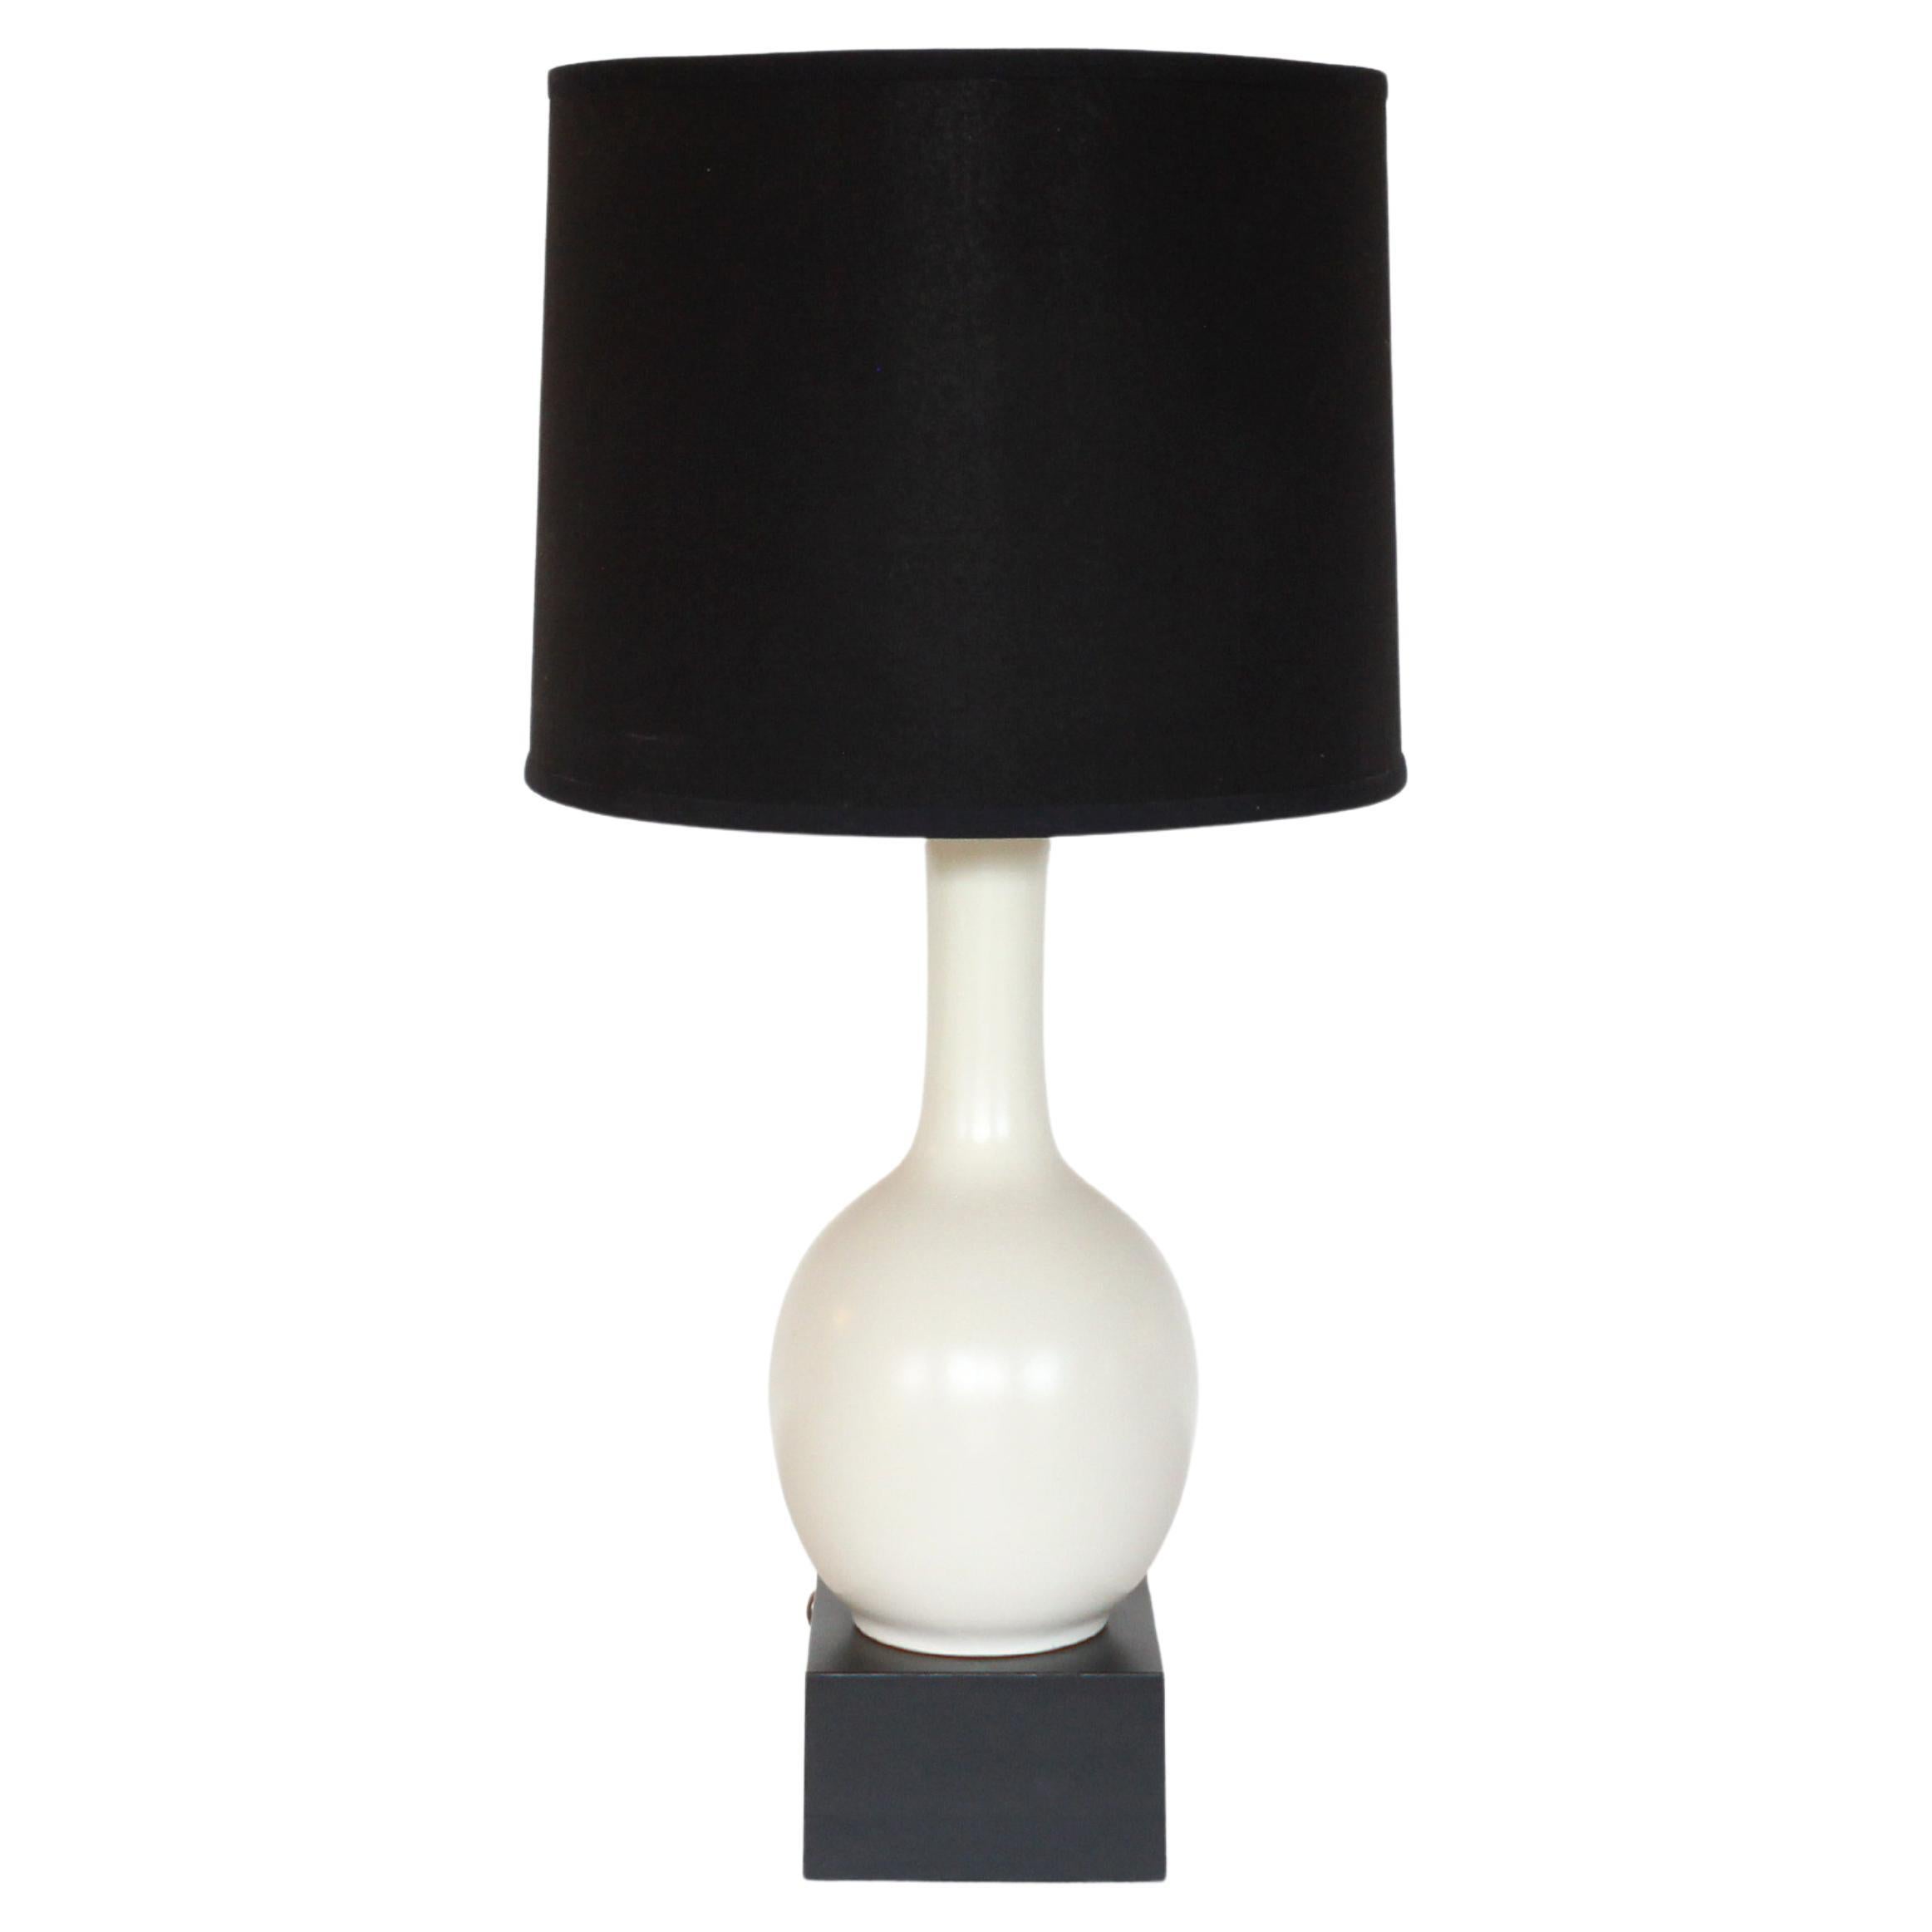 Midcentury White Craquelure Pottery Table Lamp with Black Shade